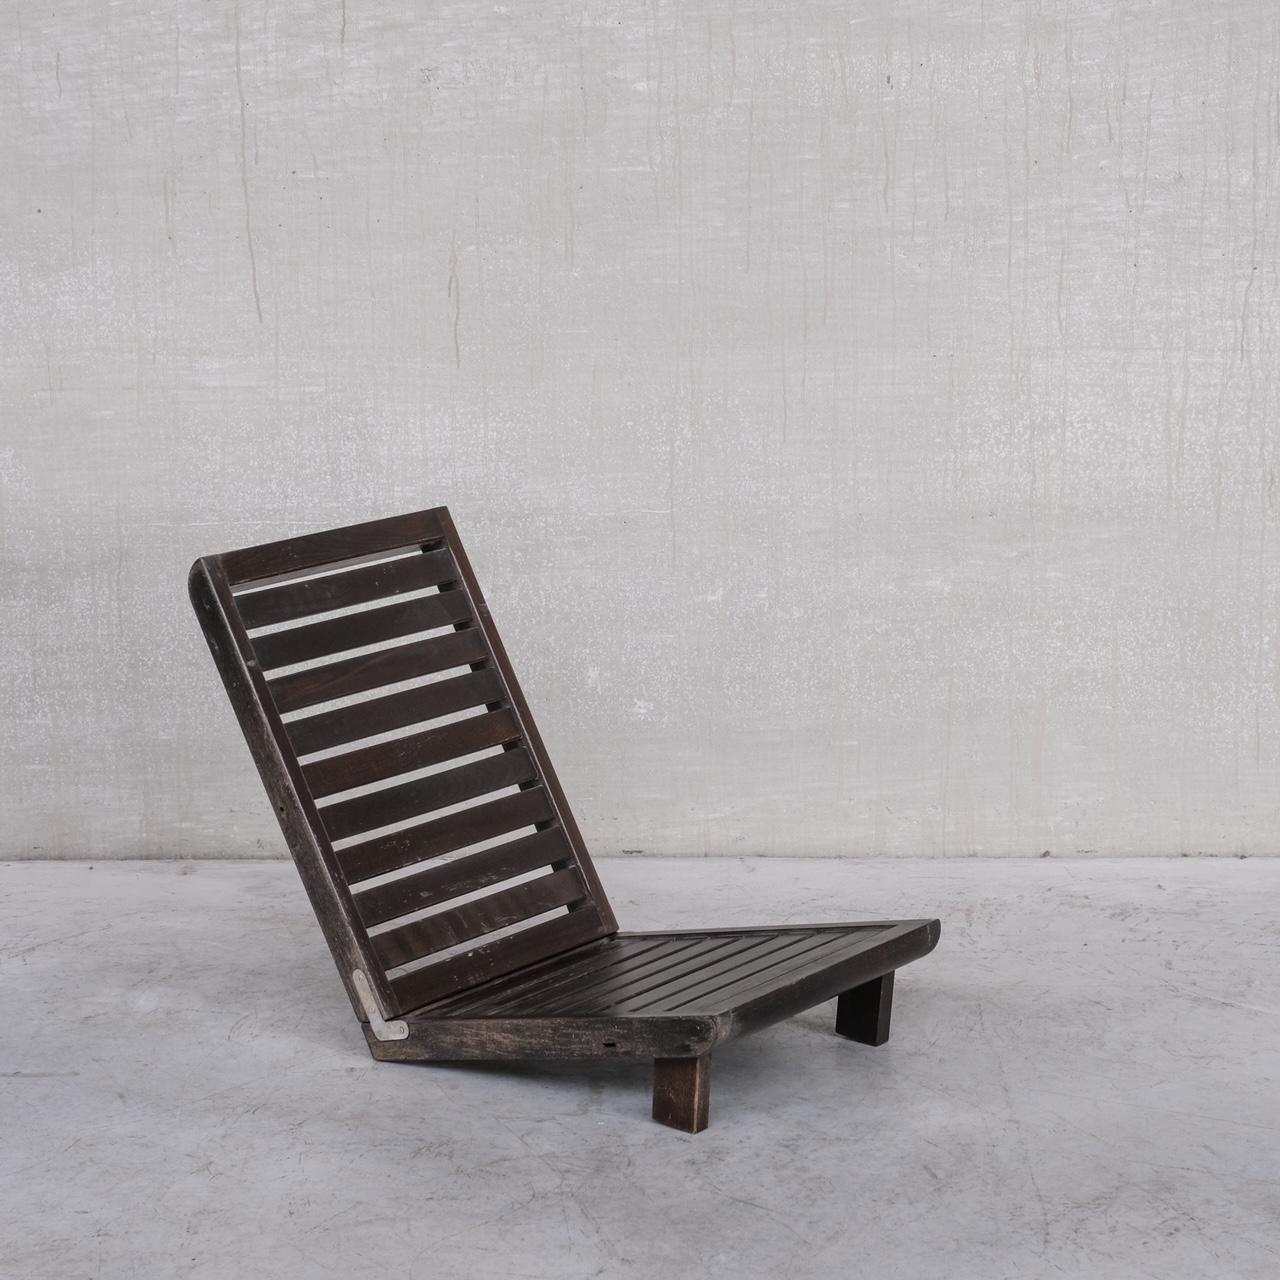 A low architectural slatted lounge chair. 

France, c1960s. 

Sourced from an Alpine resort. 

The chair designer is unknown but has echoes of the designers prominent in the design of the French alpine resorts, such as Perriand and Maison